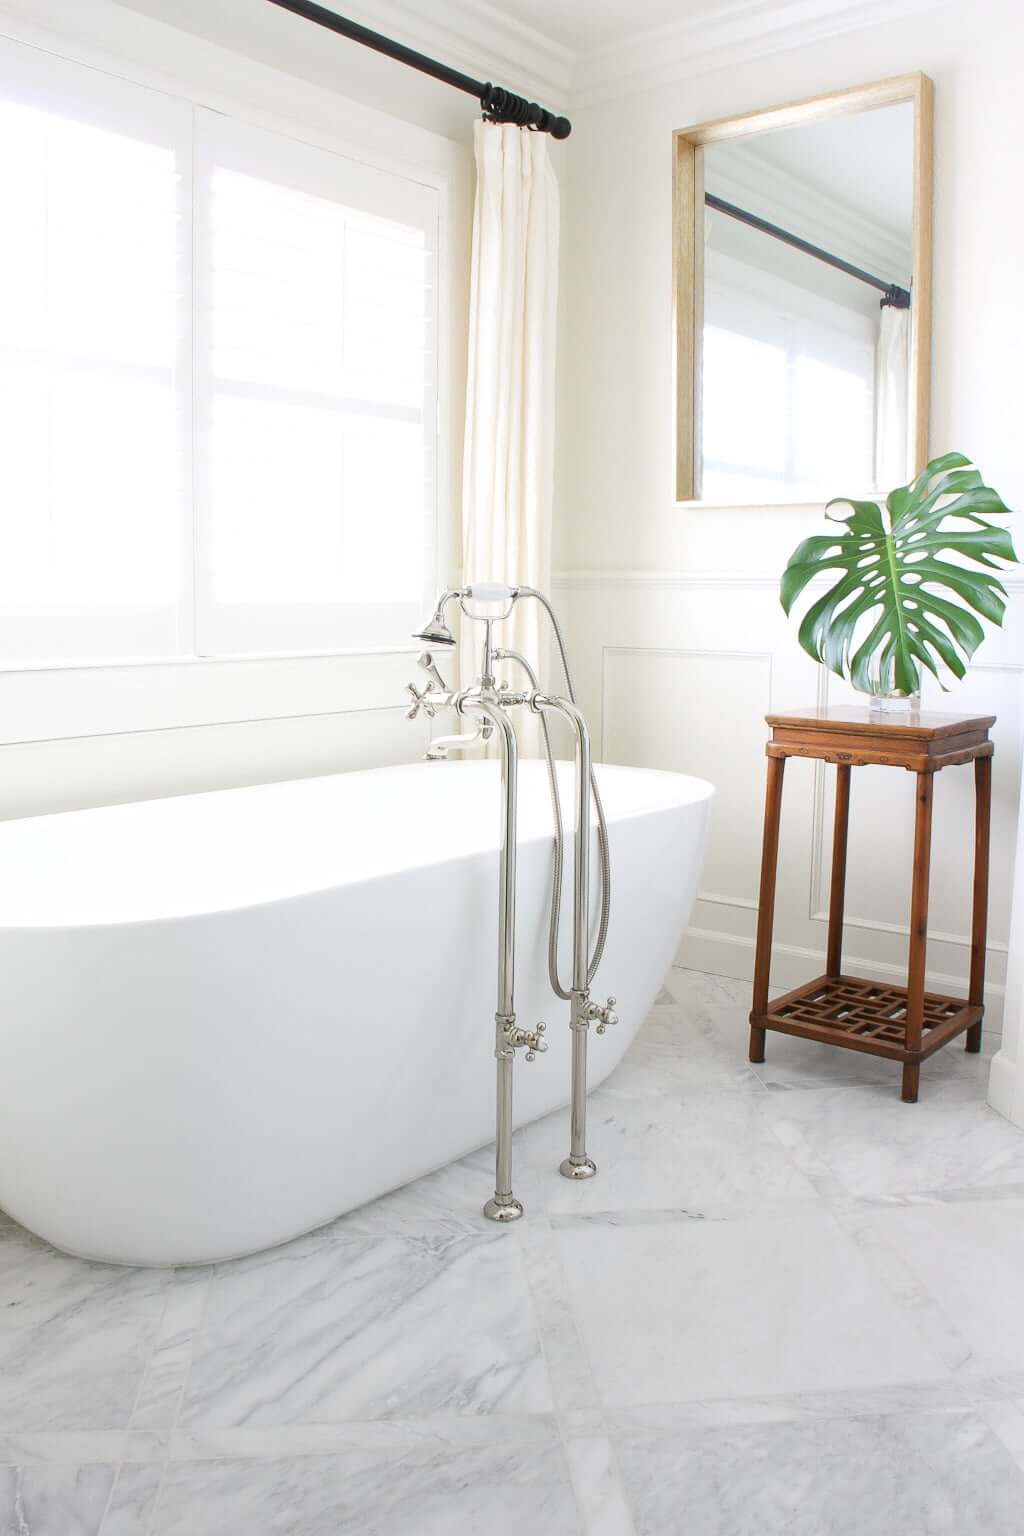 freestanding tub in master bathroom, renovated with marble tile